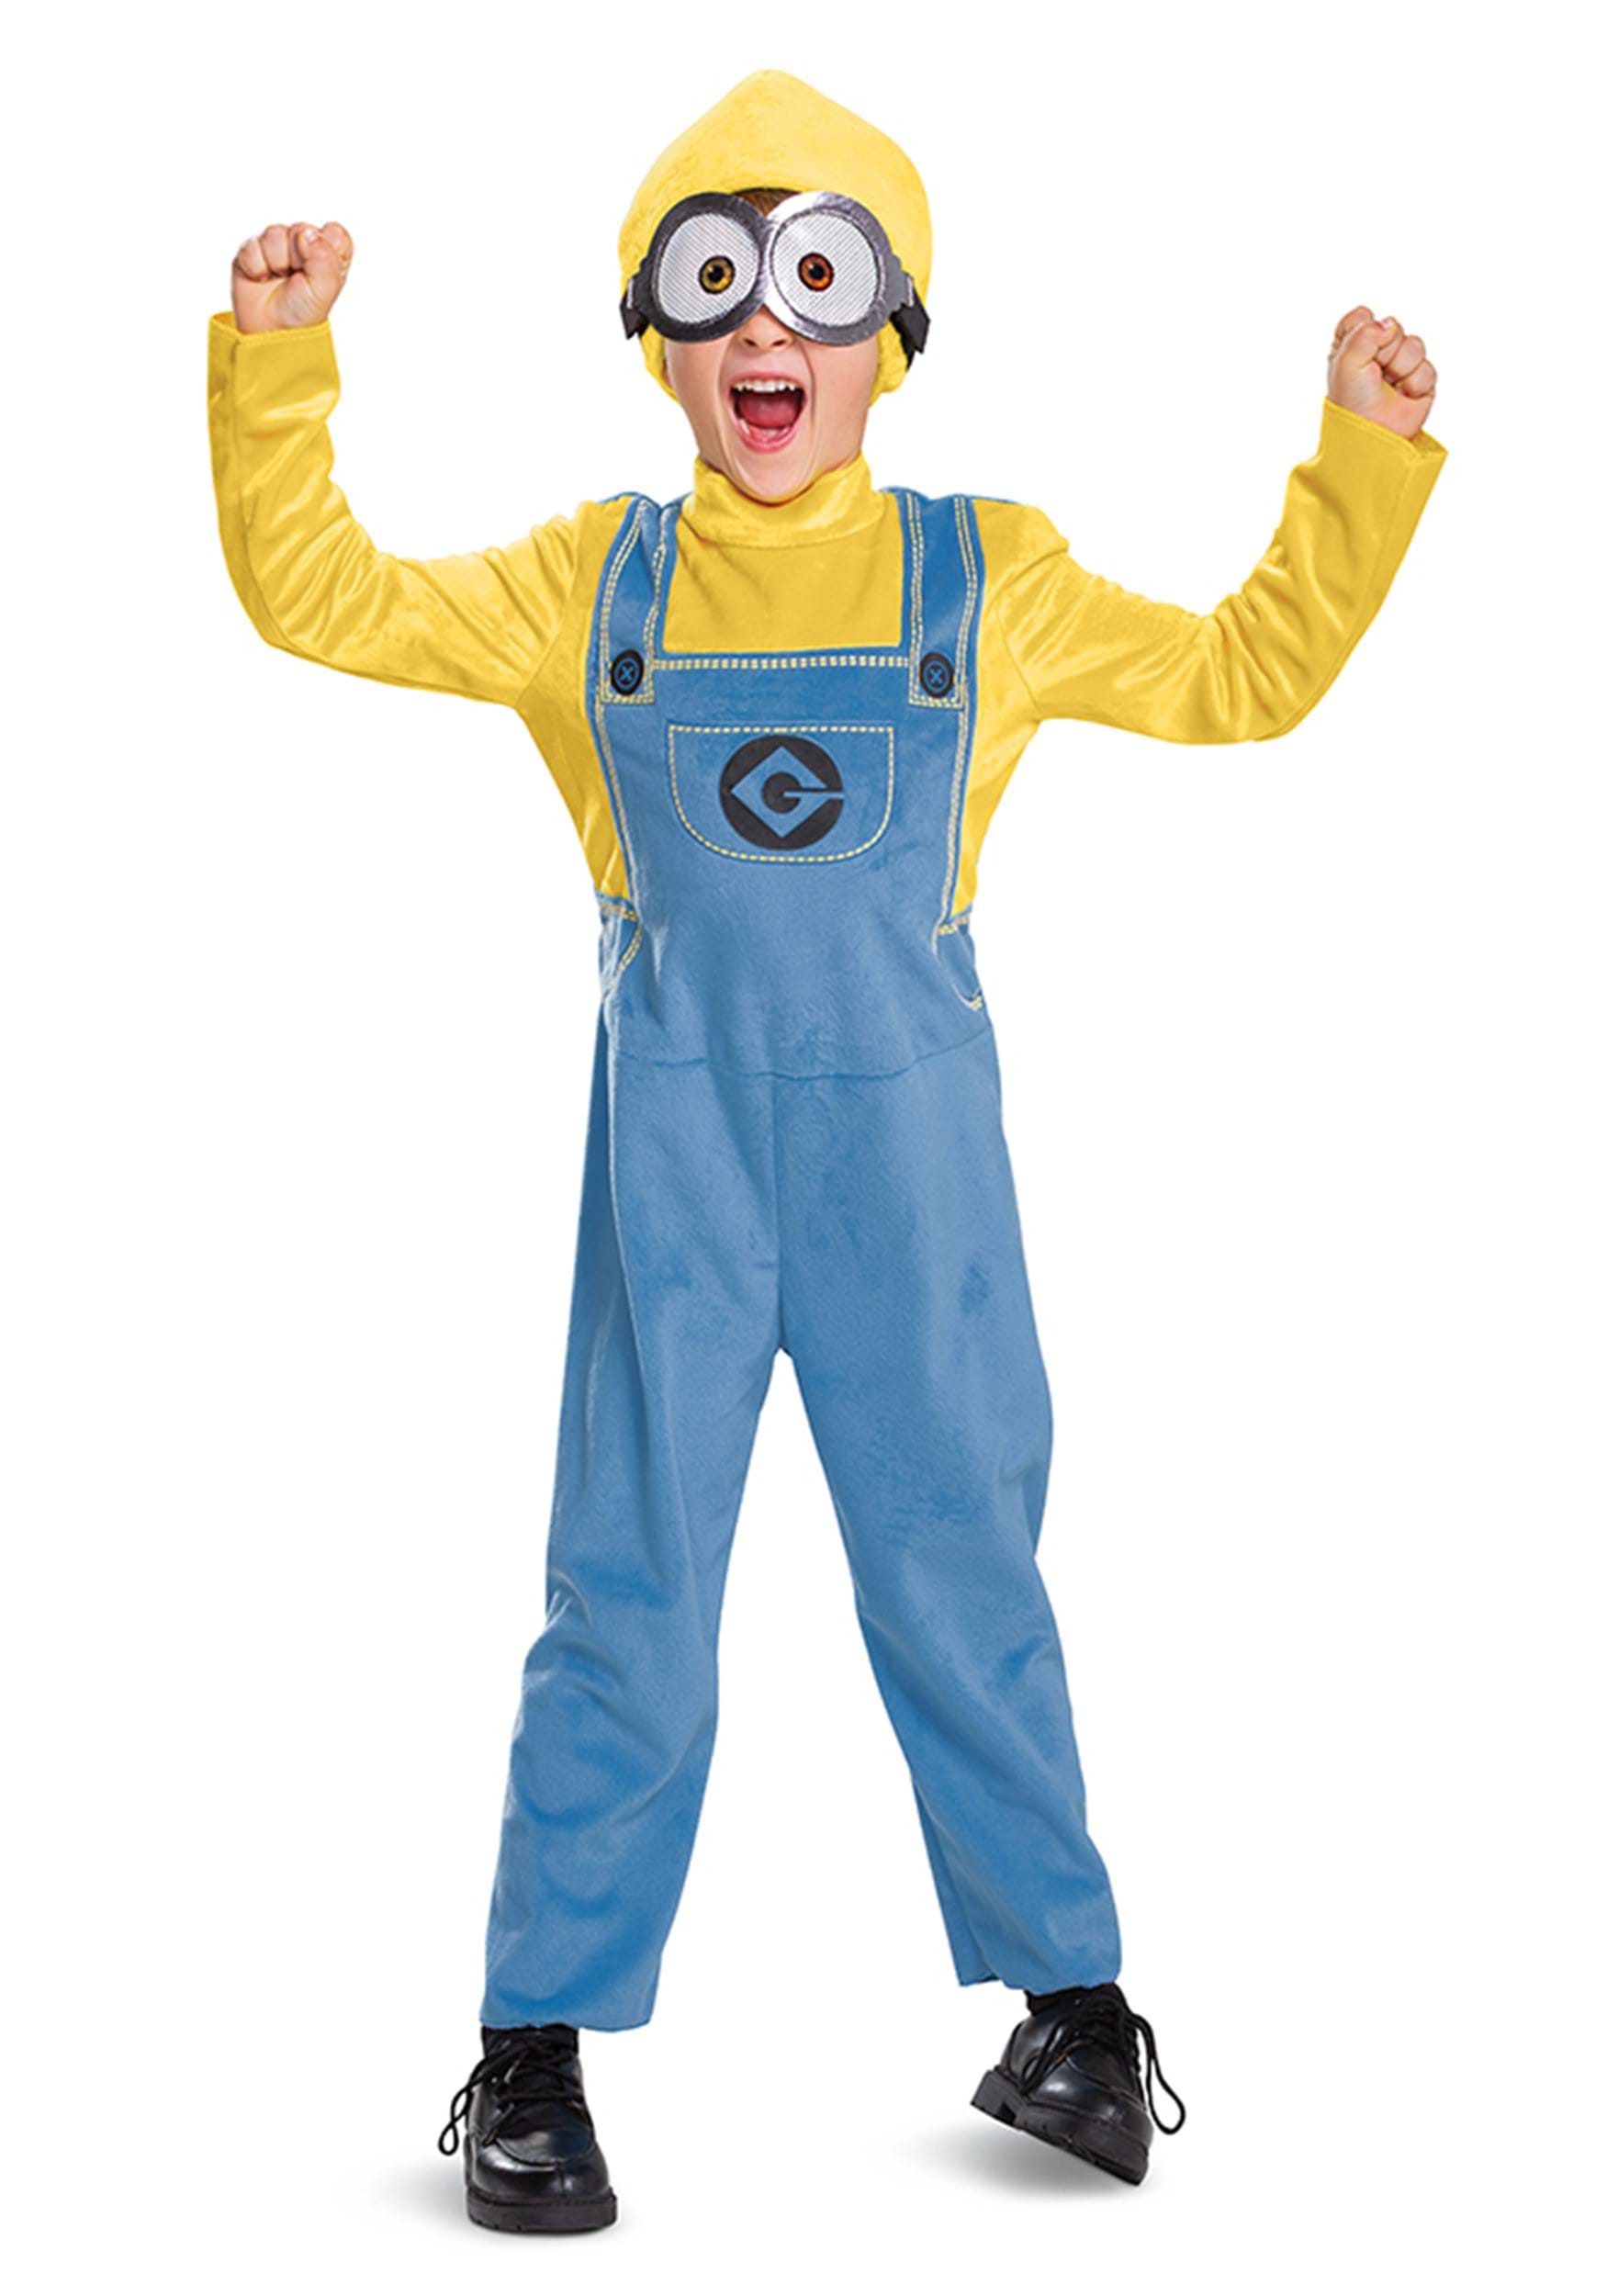 Photos - Fancy Dress Toddler Disguise Minion Costume for Toddlers Blue/Yellow DI119079 